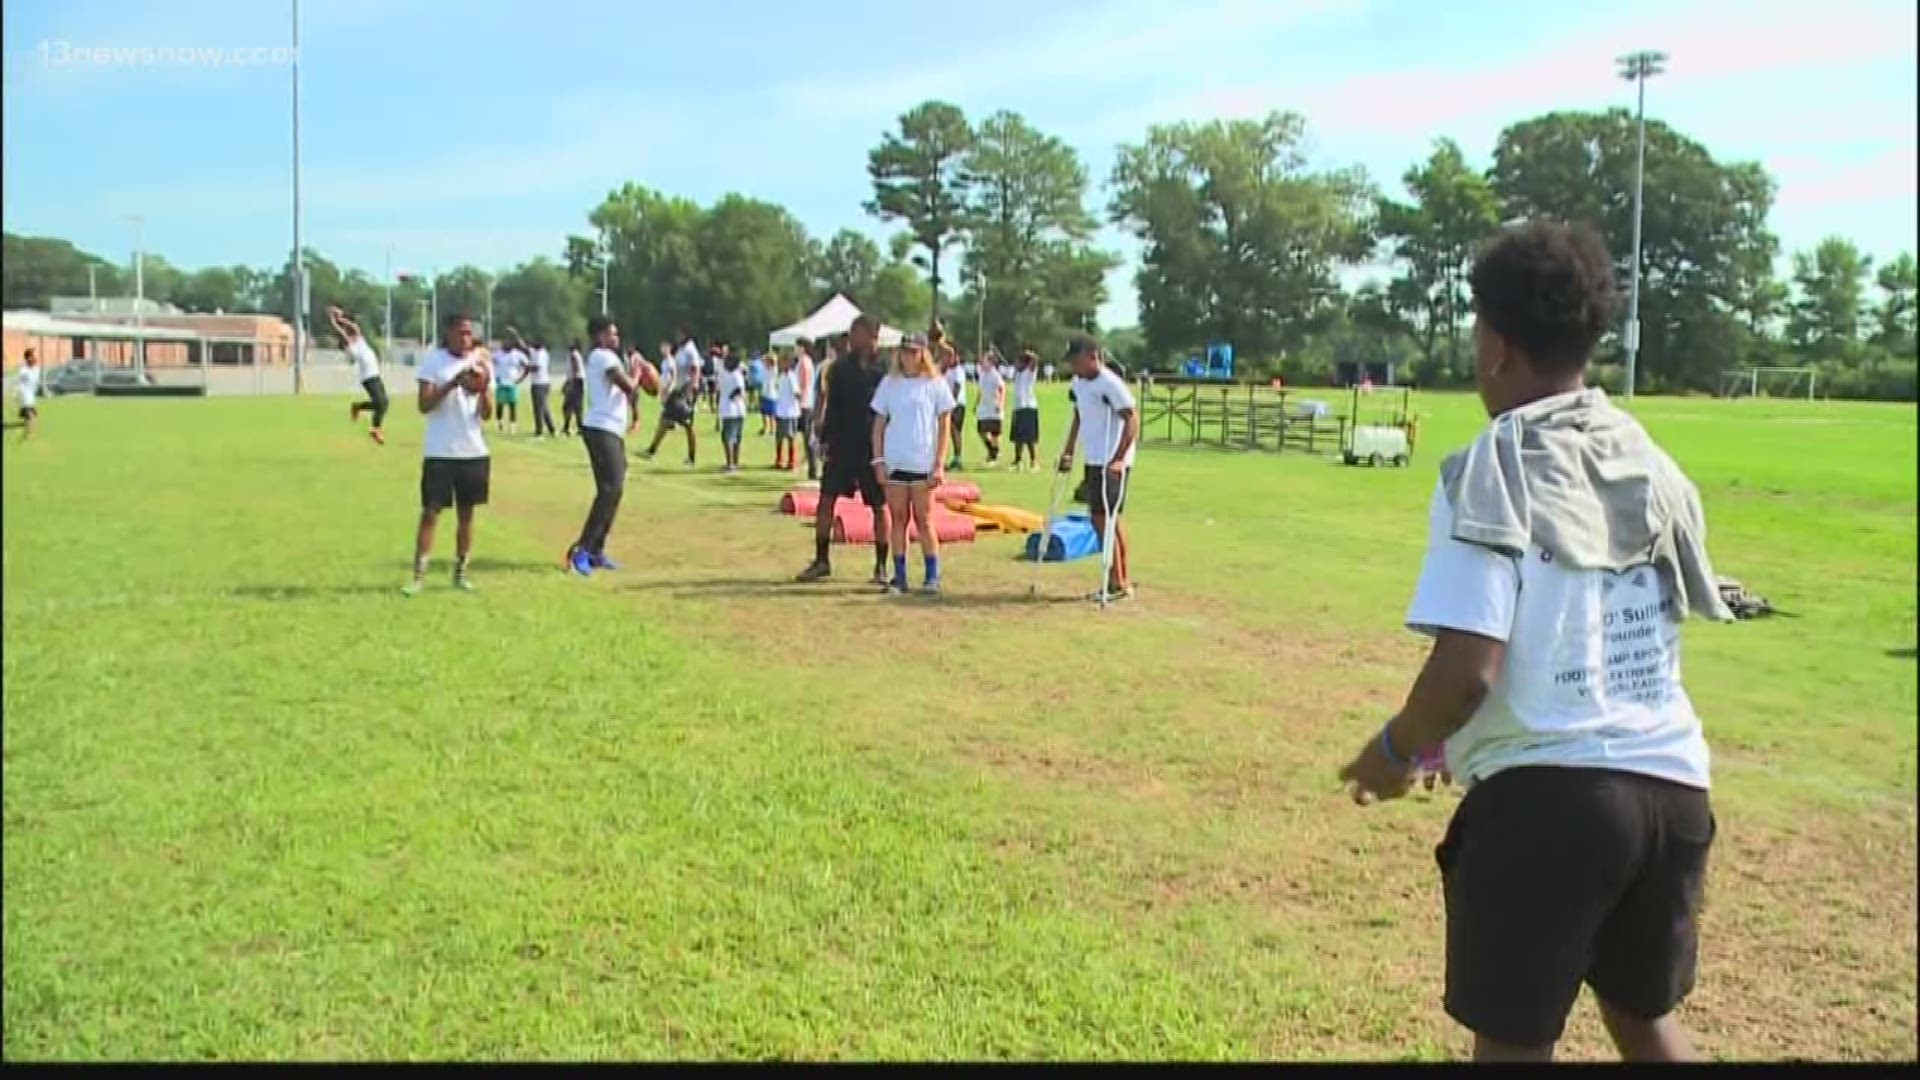 Kids ages 10 to 14 in Chesapeake are breaking a sweat on the field - it's all thanks to a free event hosted by the Chesapeake Sheriffs Office.